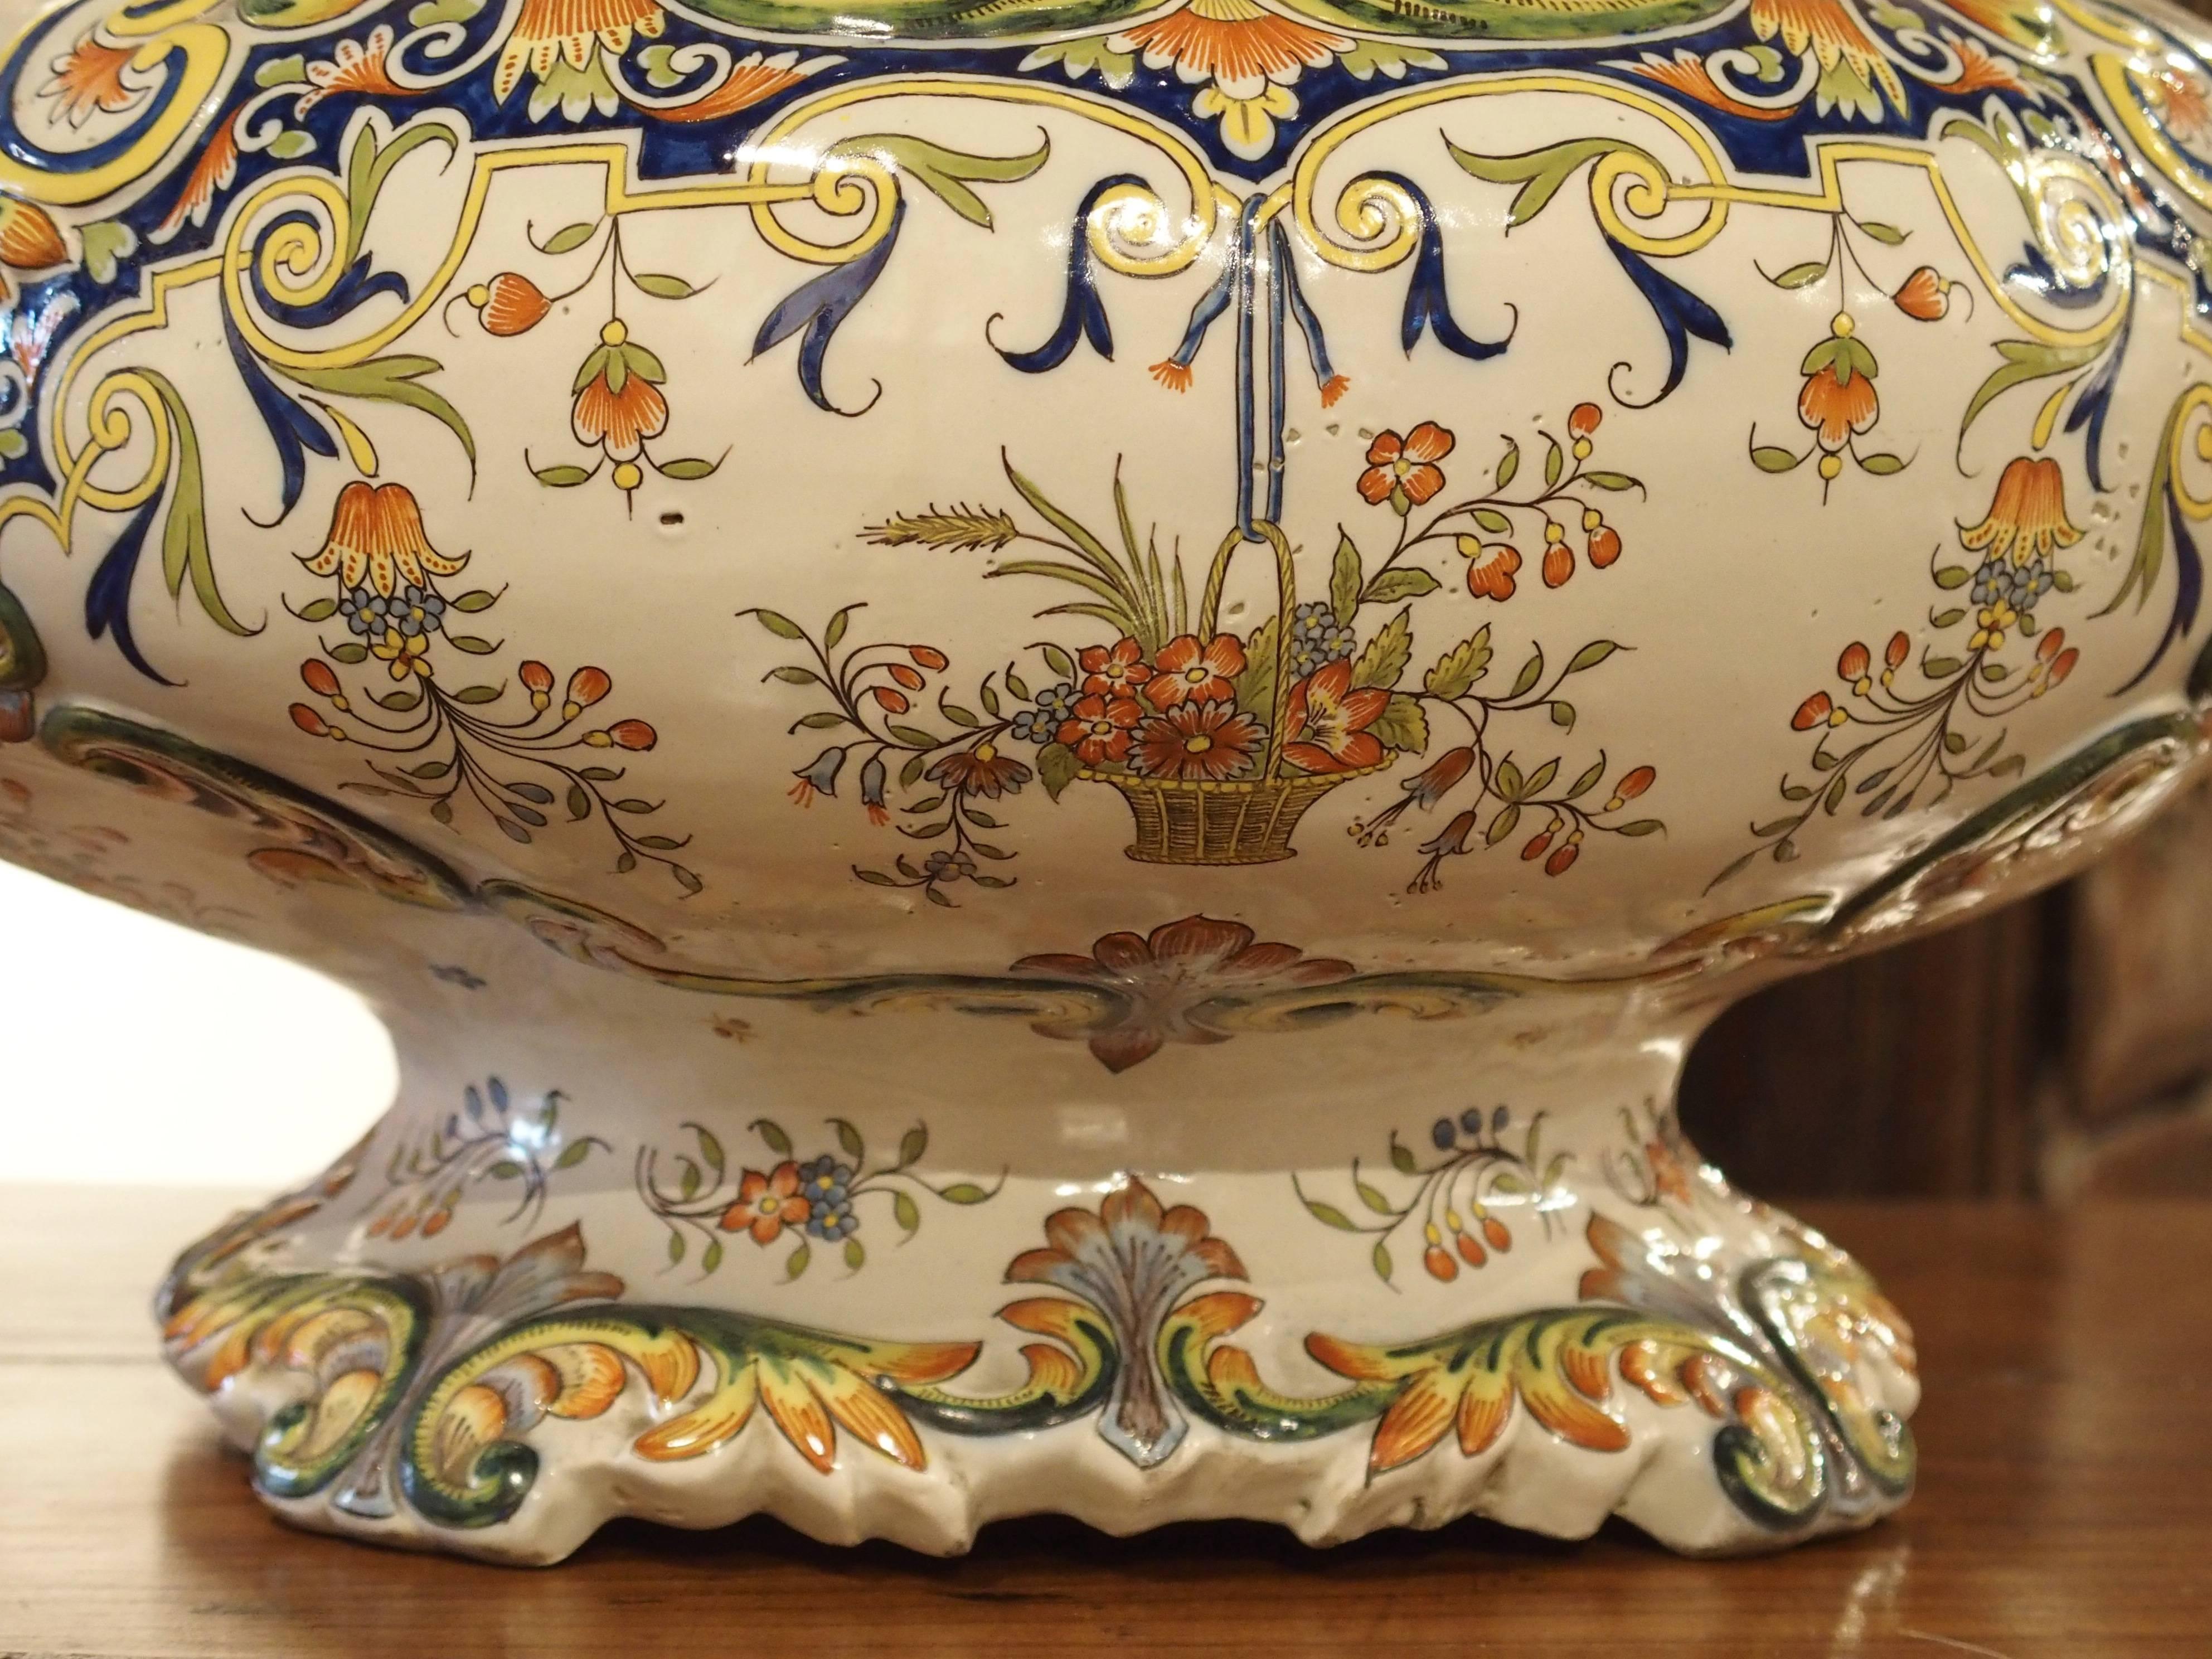 This elegant, two handled French urn has Rouen decoration throughout. It is hard paste, with a ground color of white and accompanying colors of orange, yellow, pale green, navy blue, and pale blue. These colors and the beautiful motifs are typical